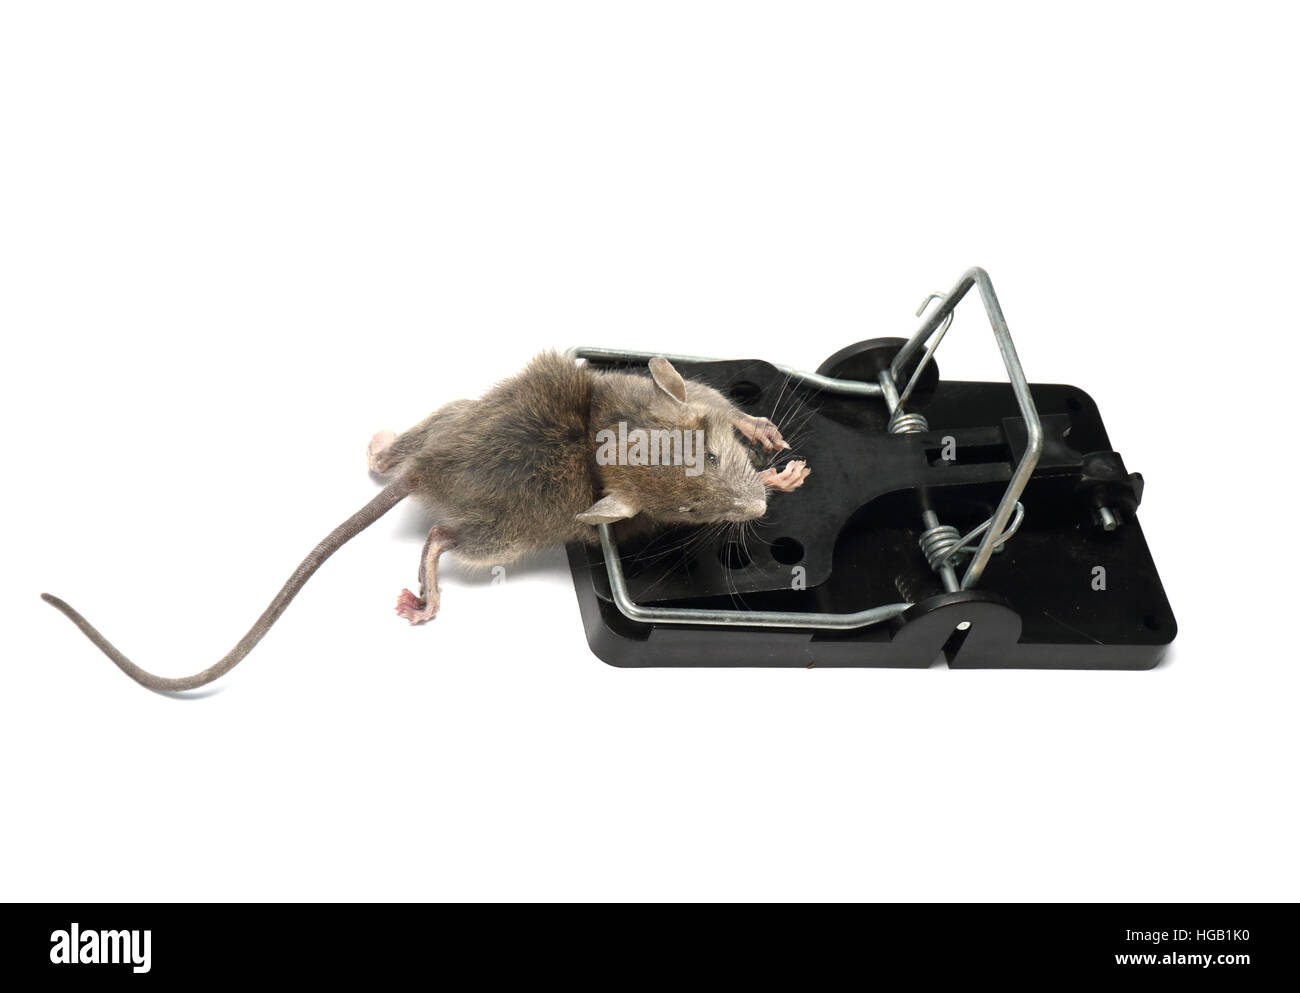 https://c8.alamy.com/comp/HGB1K0/house-mouse-mus-musculus-caught-and-killed-in-a-spring-trap-photographed-HGB1K0.jpg